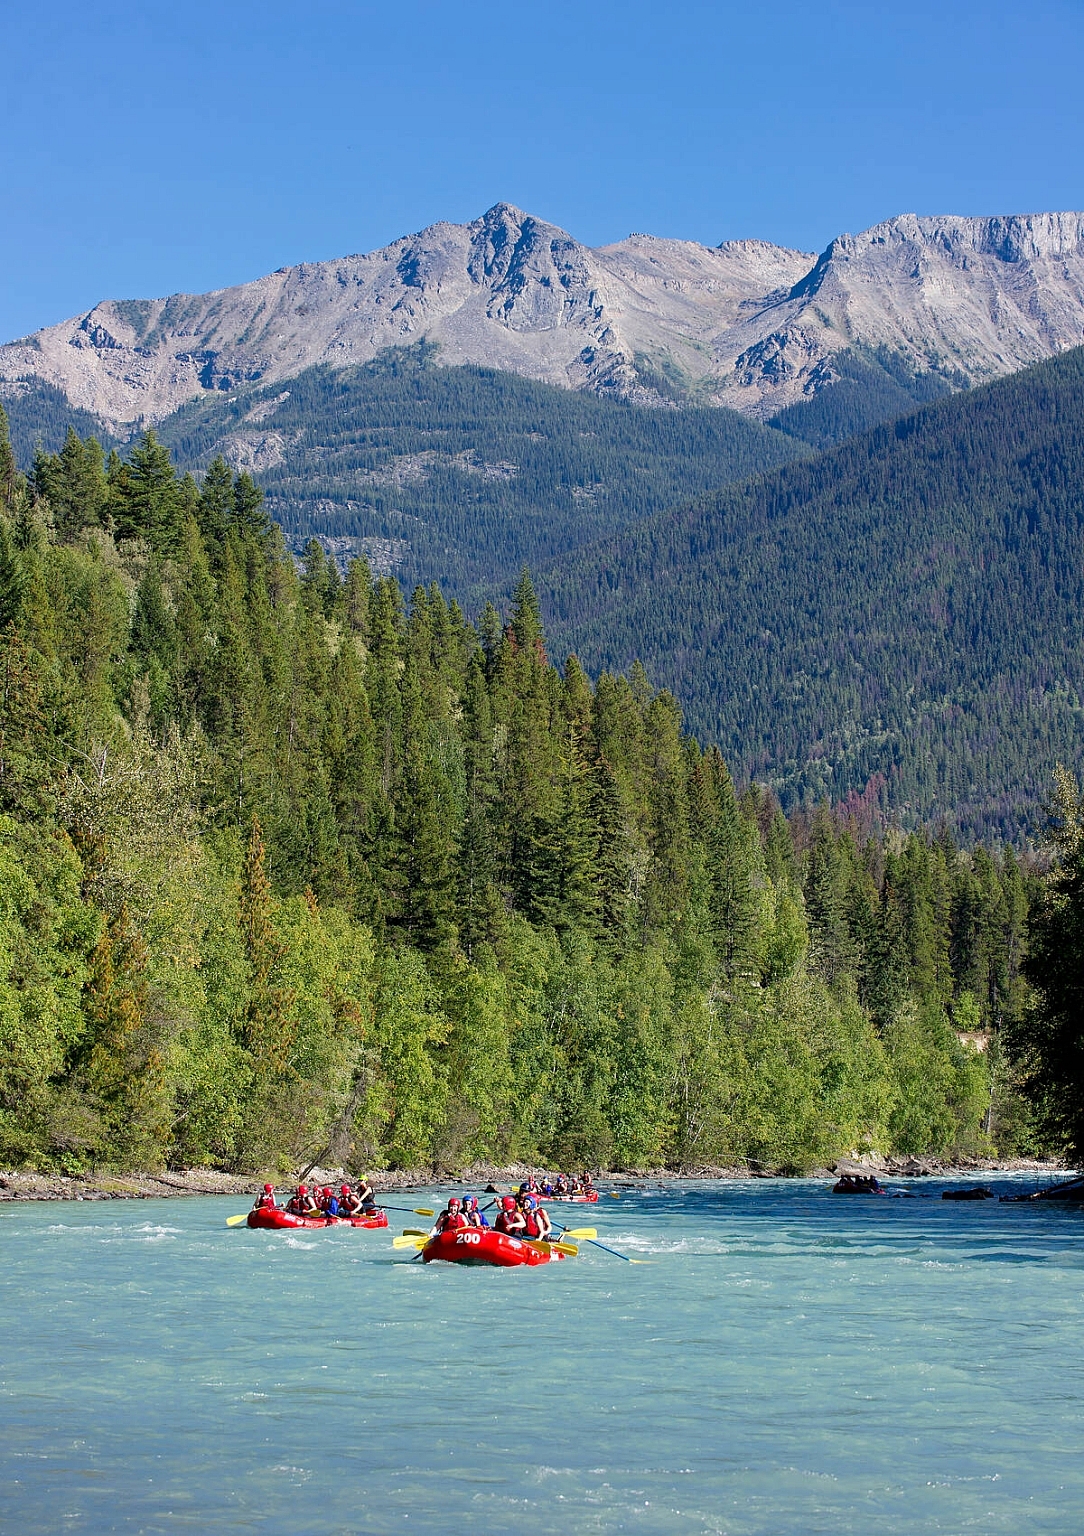 Several boats river raft down a turquoise-coloured river with mountains in the background